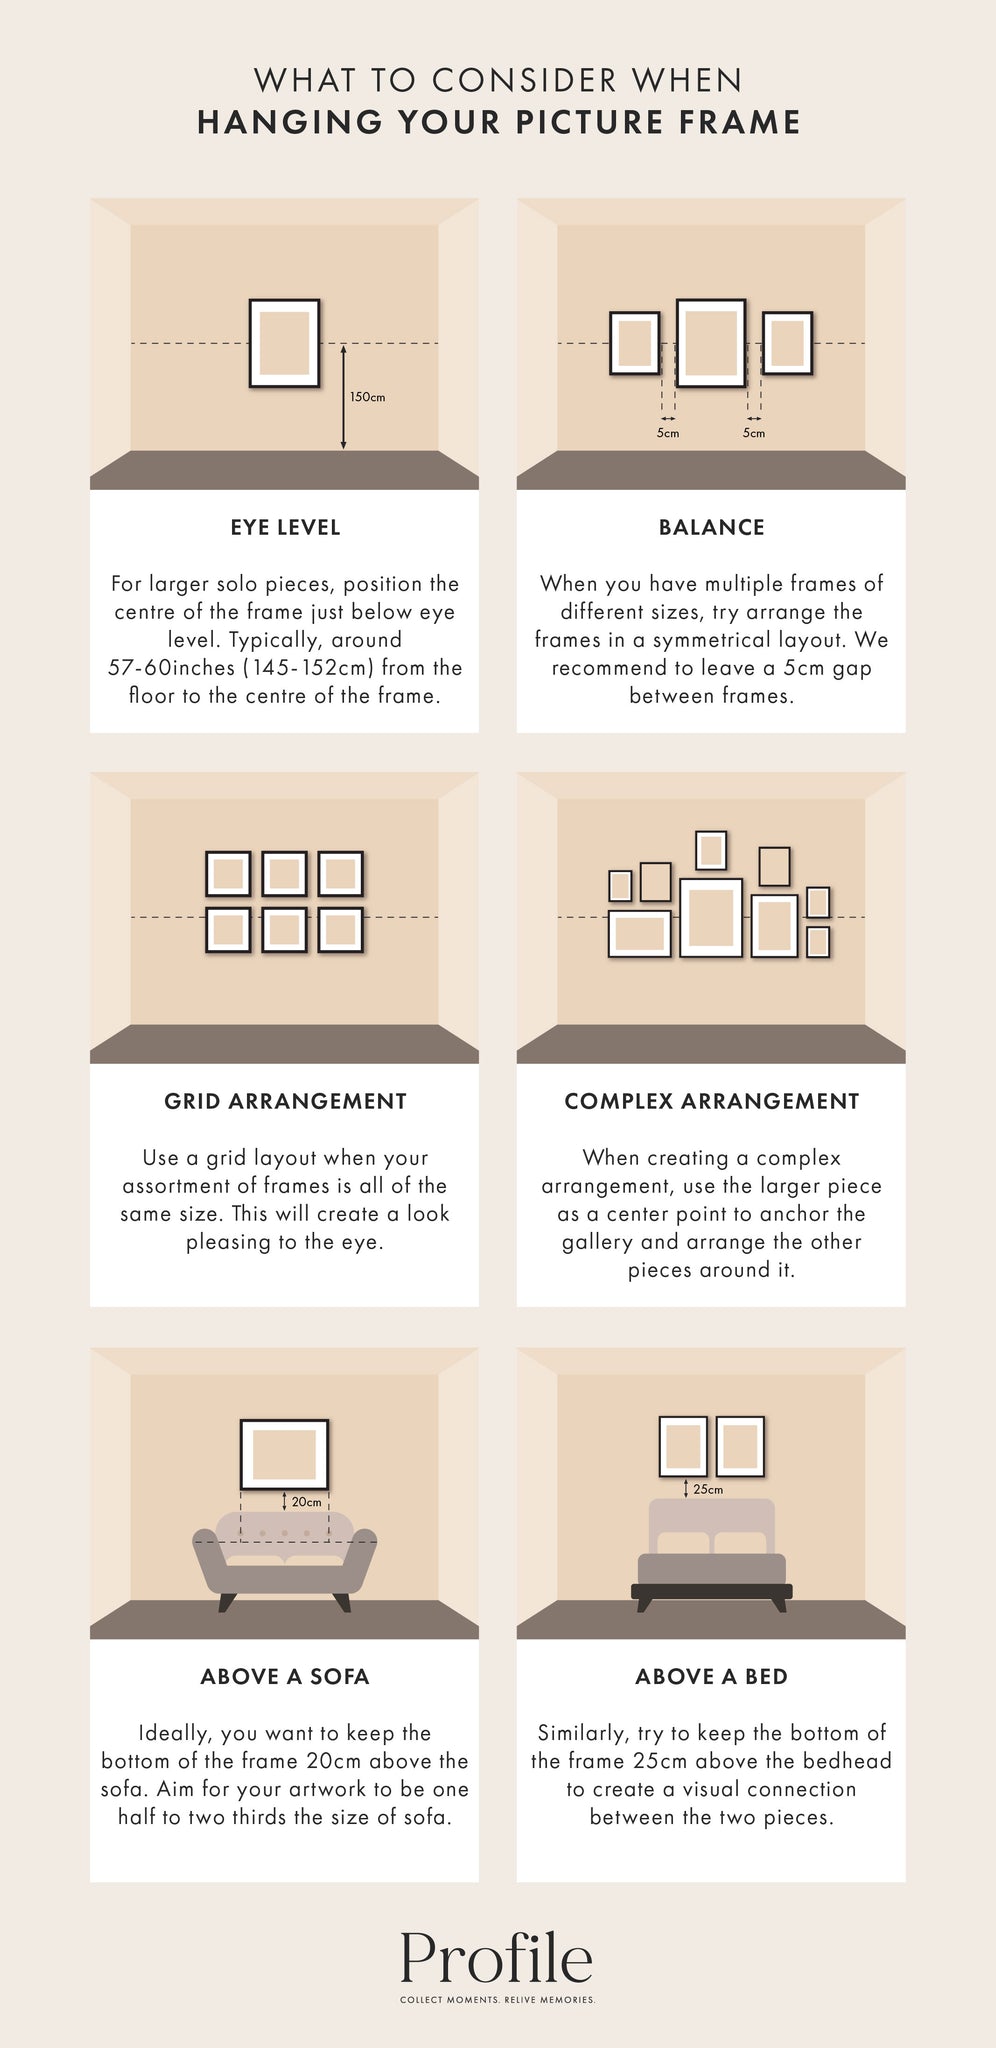 Where to hang a picture frame infographic